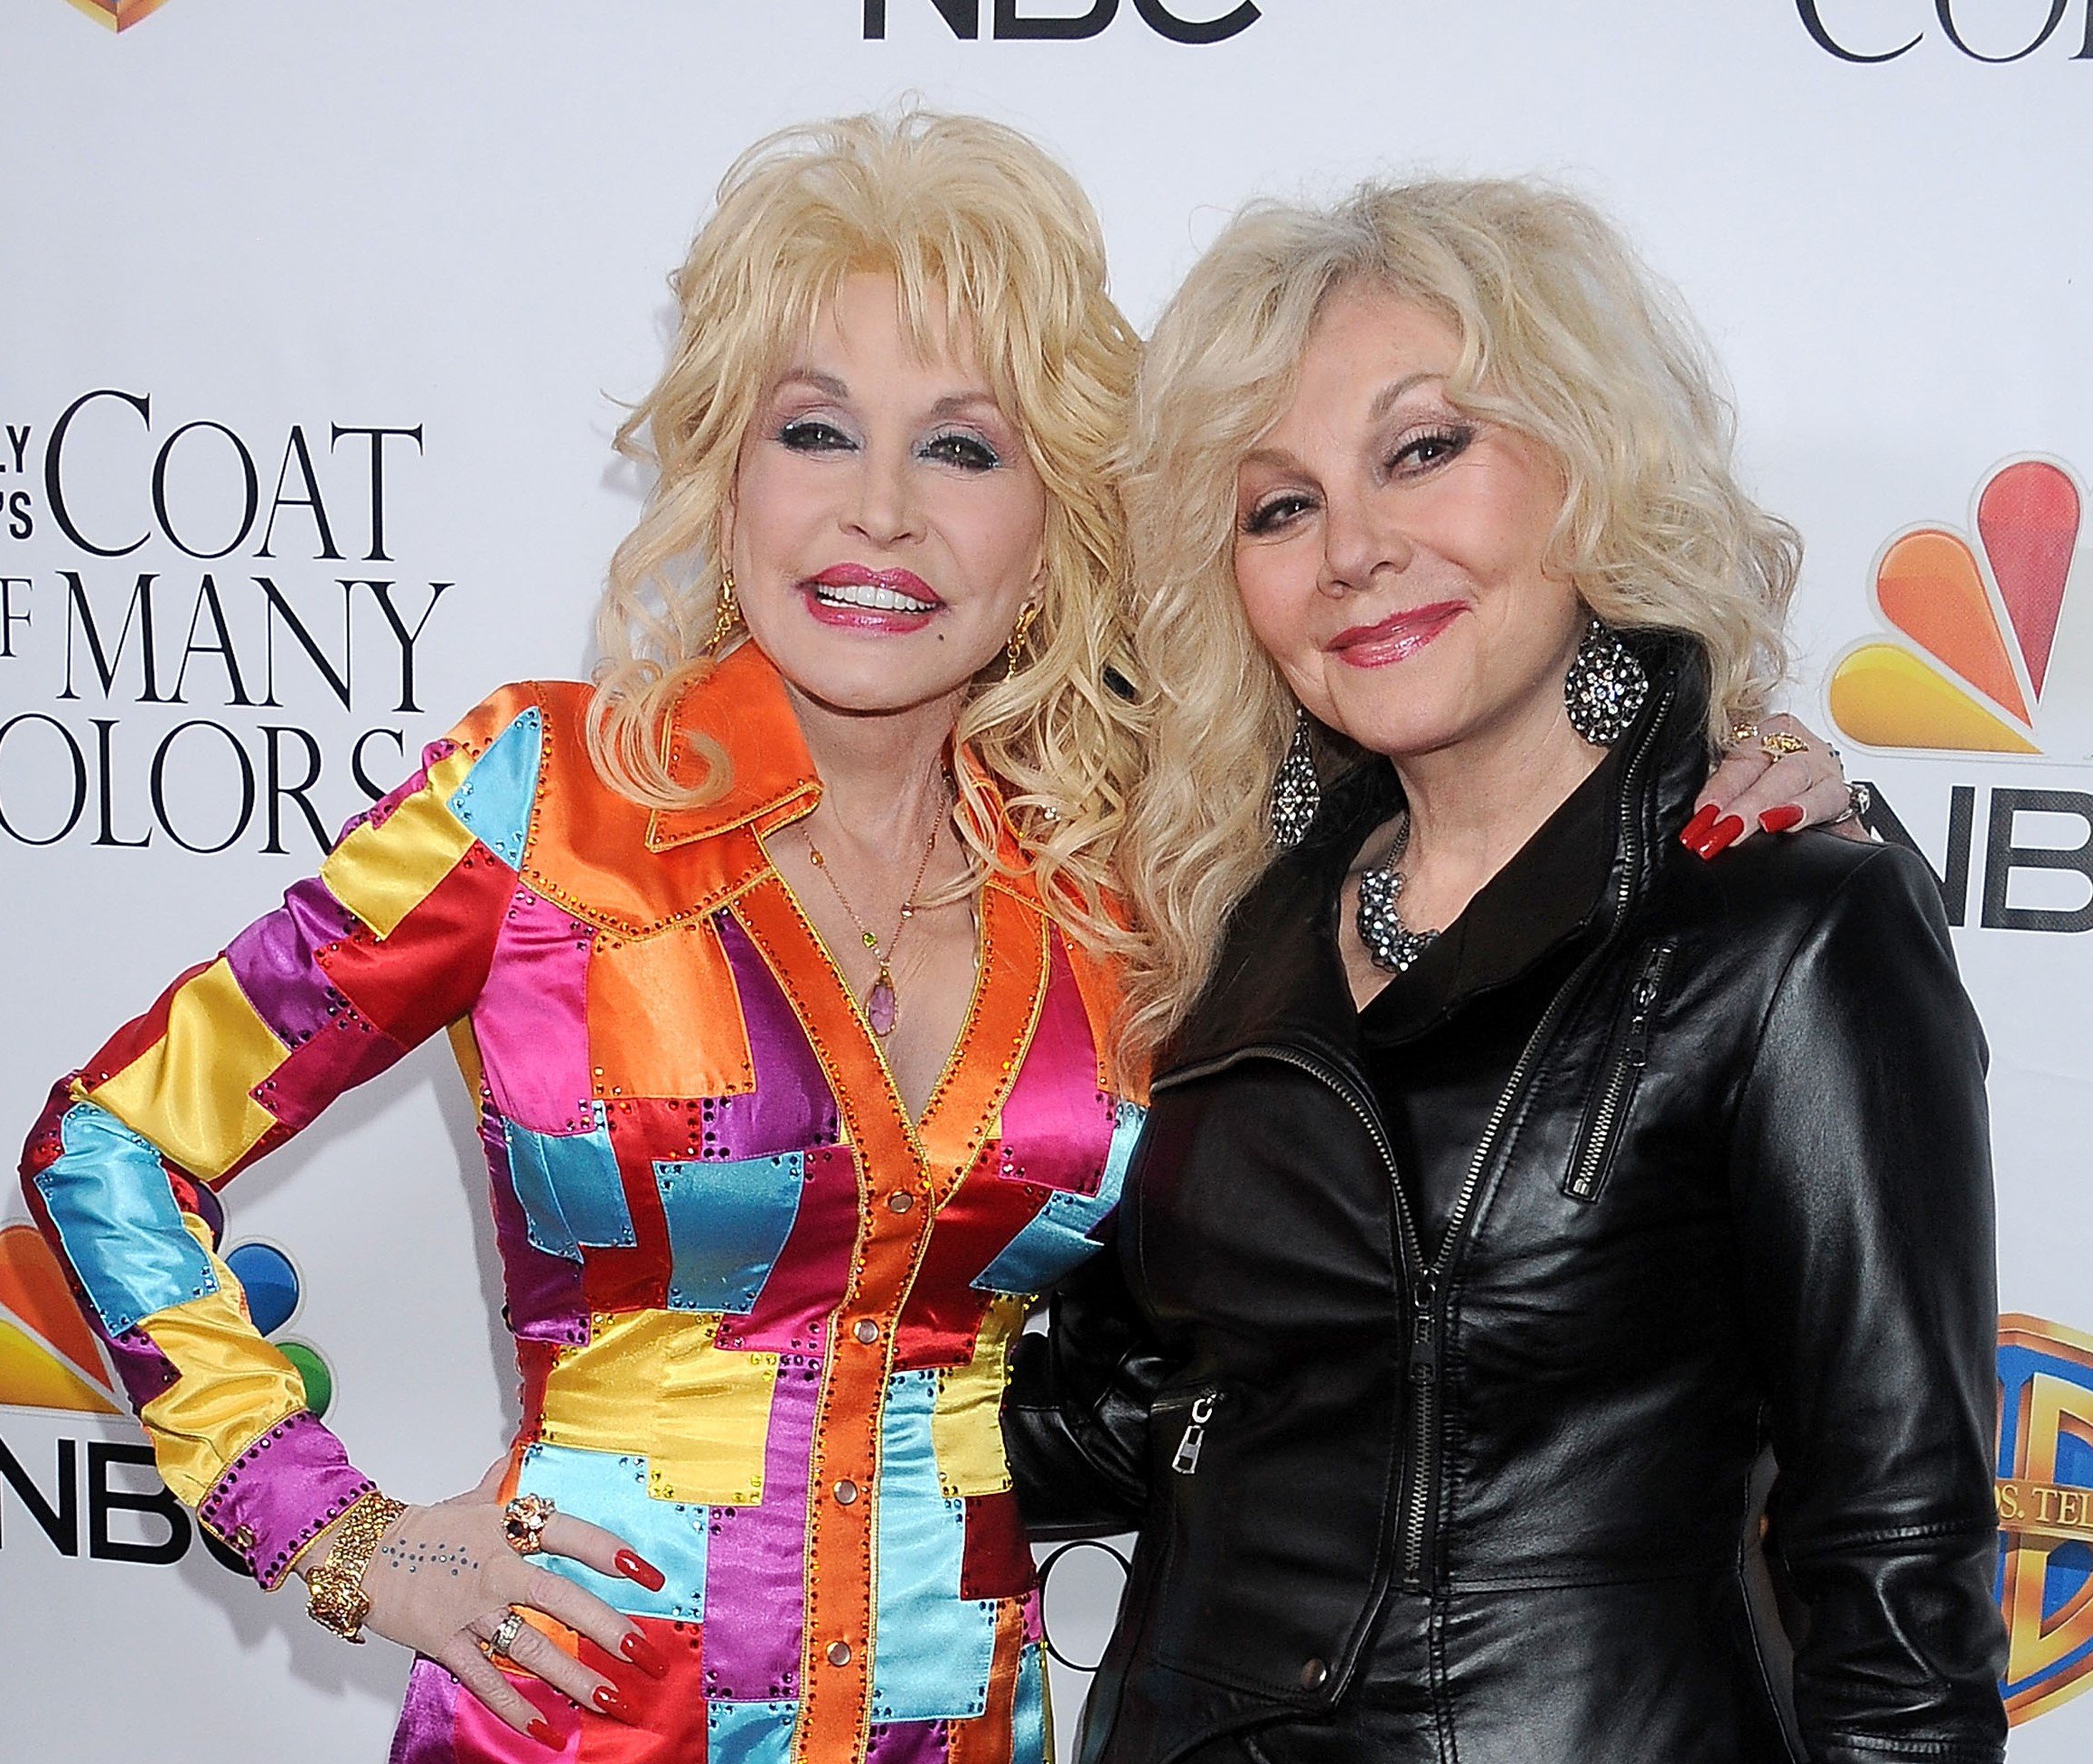 Dolly Parton and her sibling Stela Parton. Dolly Parton wears a rainbow jacket and Stella Parton wears a black leather jacket.